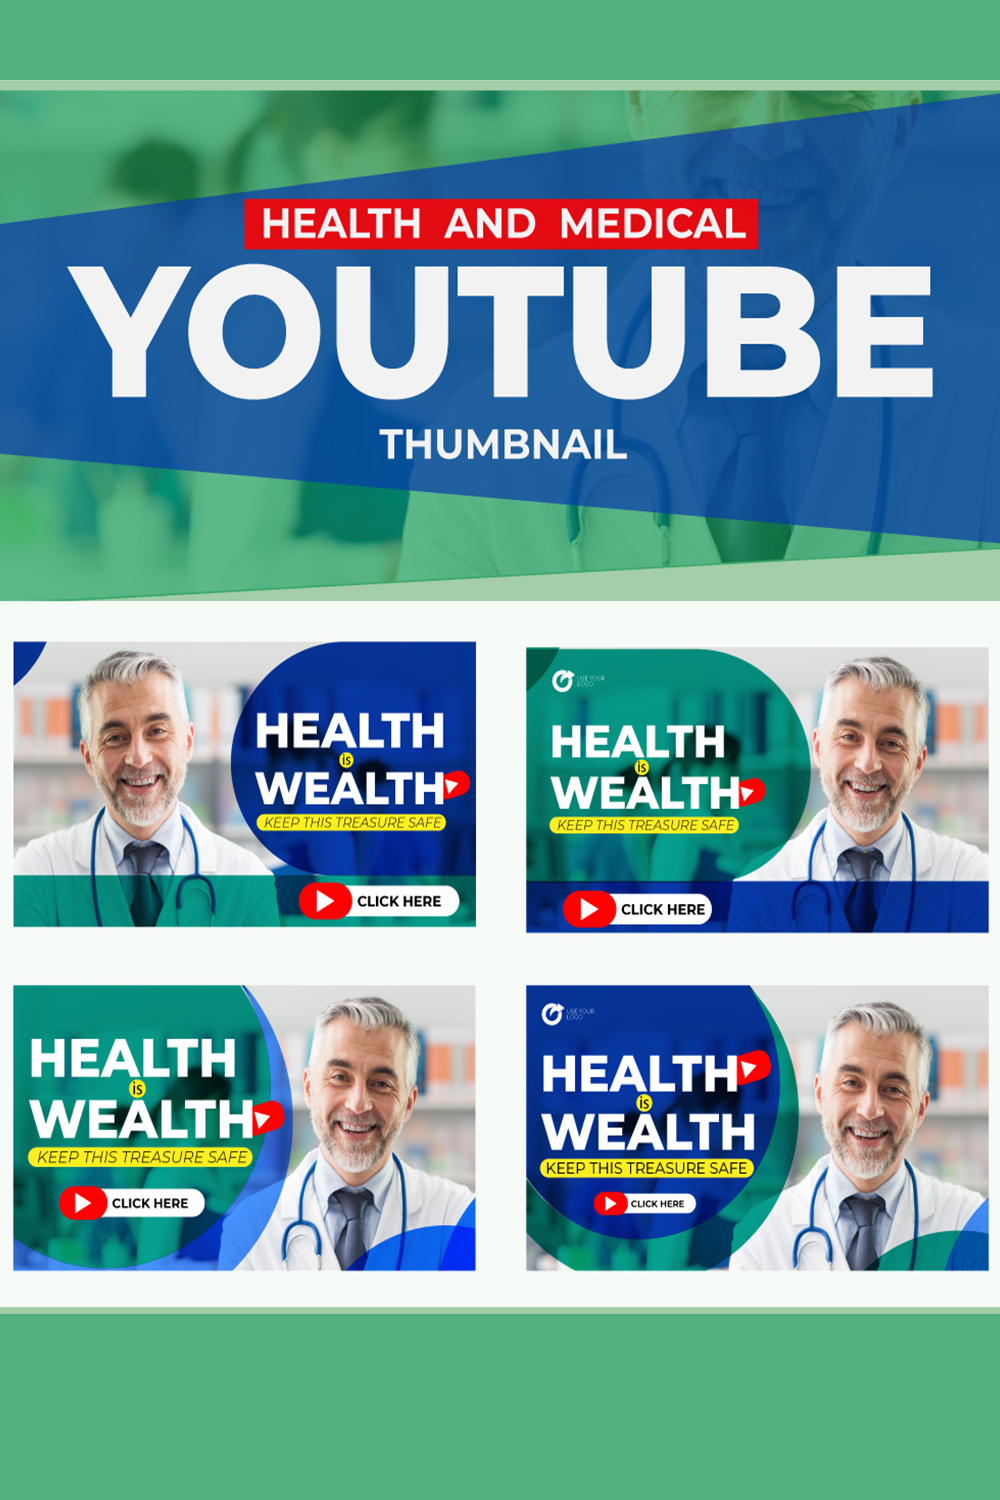 YouTube Thumbnail Template for Health and Medical pinterest image.